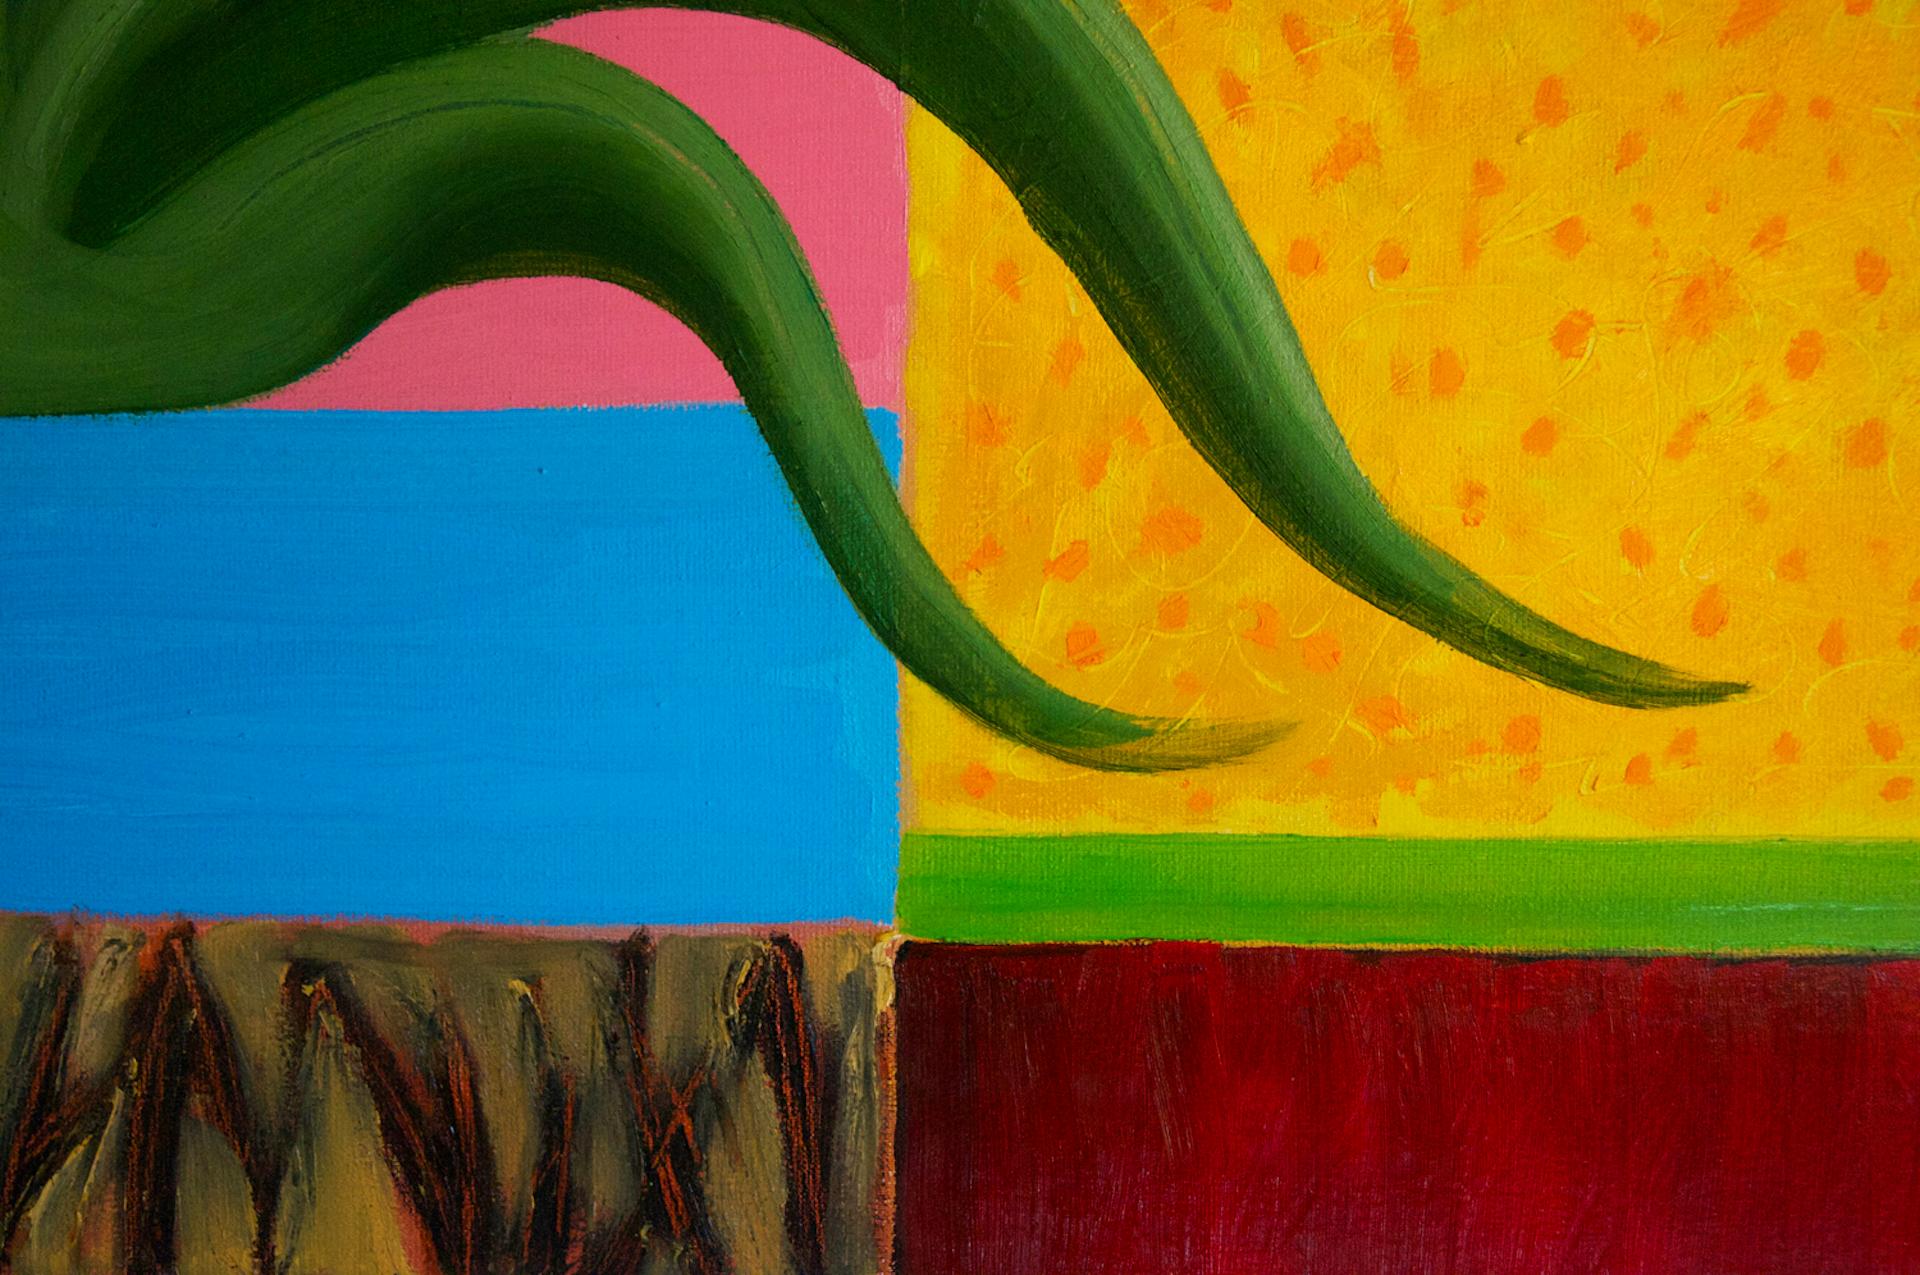 Christo Sharpe
Hot garden
Original oil painting on canvas
Size: H 46cm x W 61cm x D 2cms
Sold Unframed
(Please note that in situ images are purely an indication of how a piece may look).

Hot garden is an original painting by Christo Sharpe. Christo